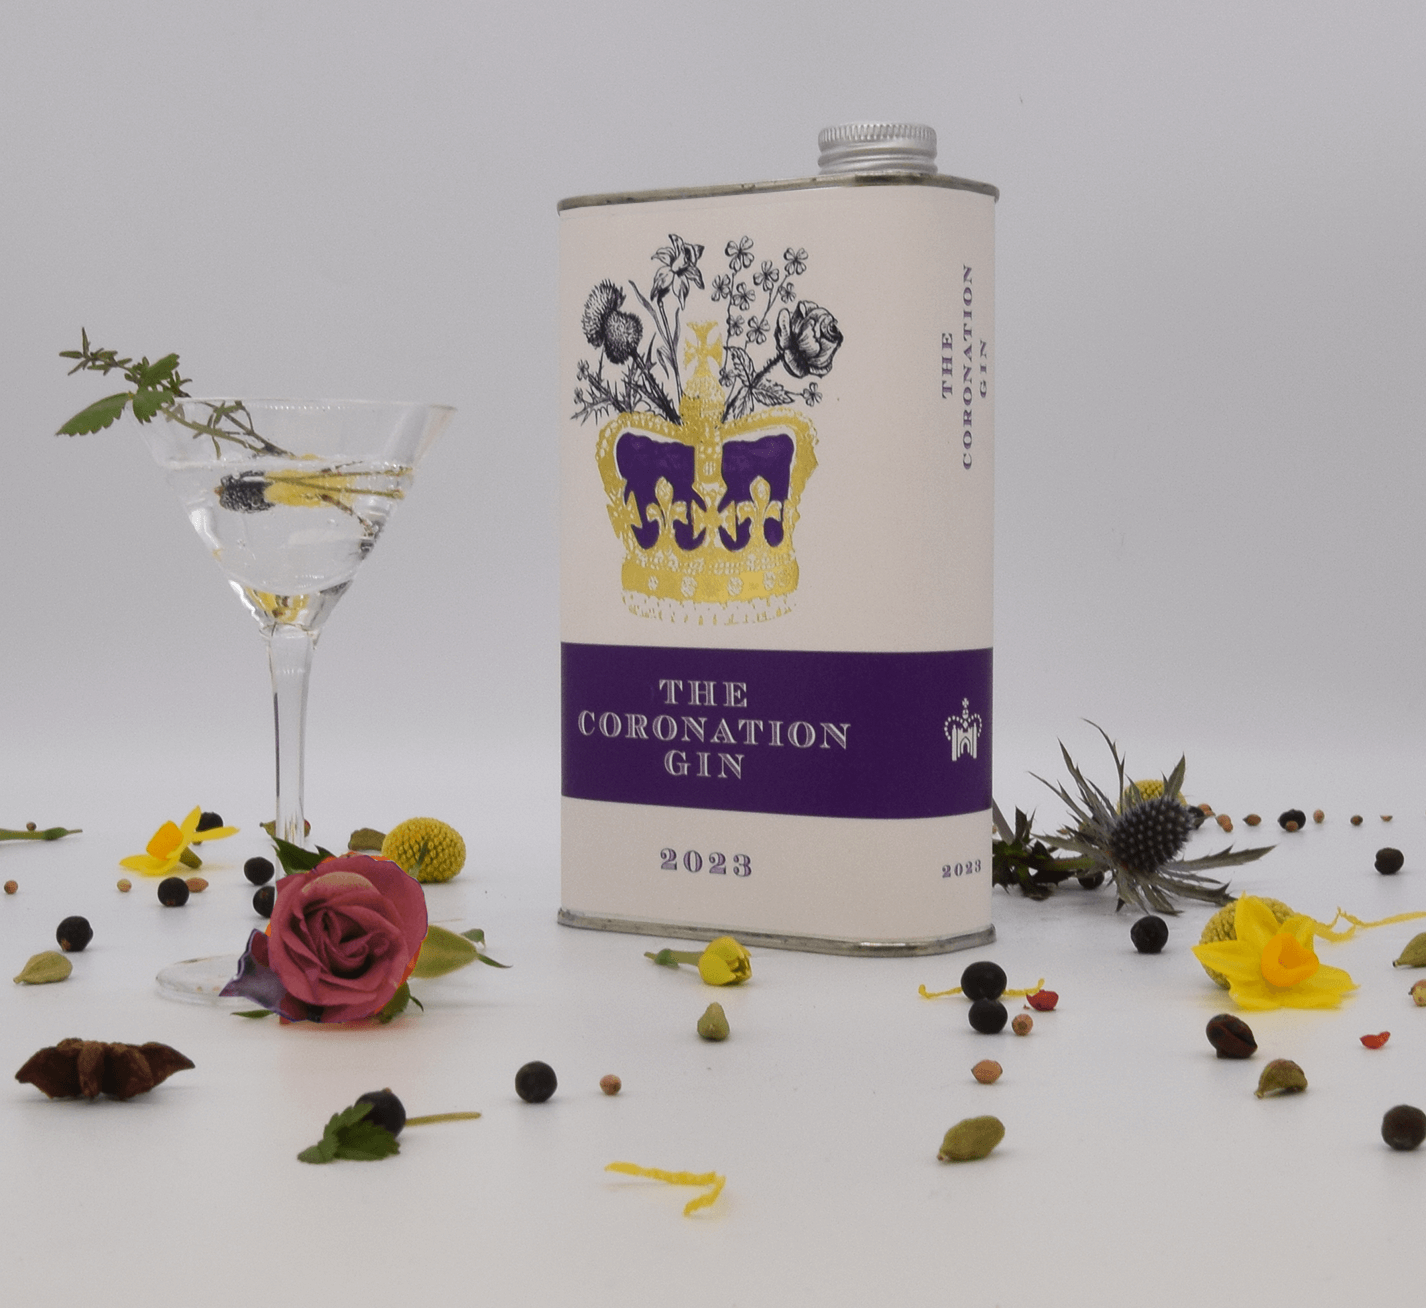 The Official, Gin In A Tin Coronation Gin, in Collaboration with Historic Royal Palaces to celebrate the Coronation of King Charles III